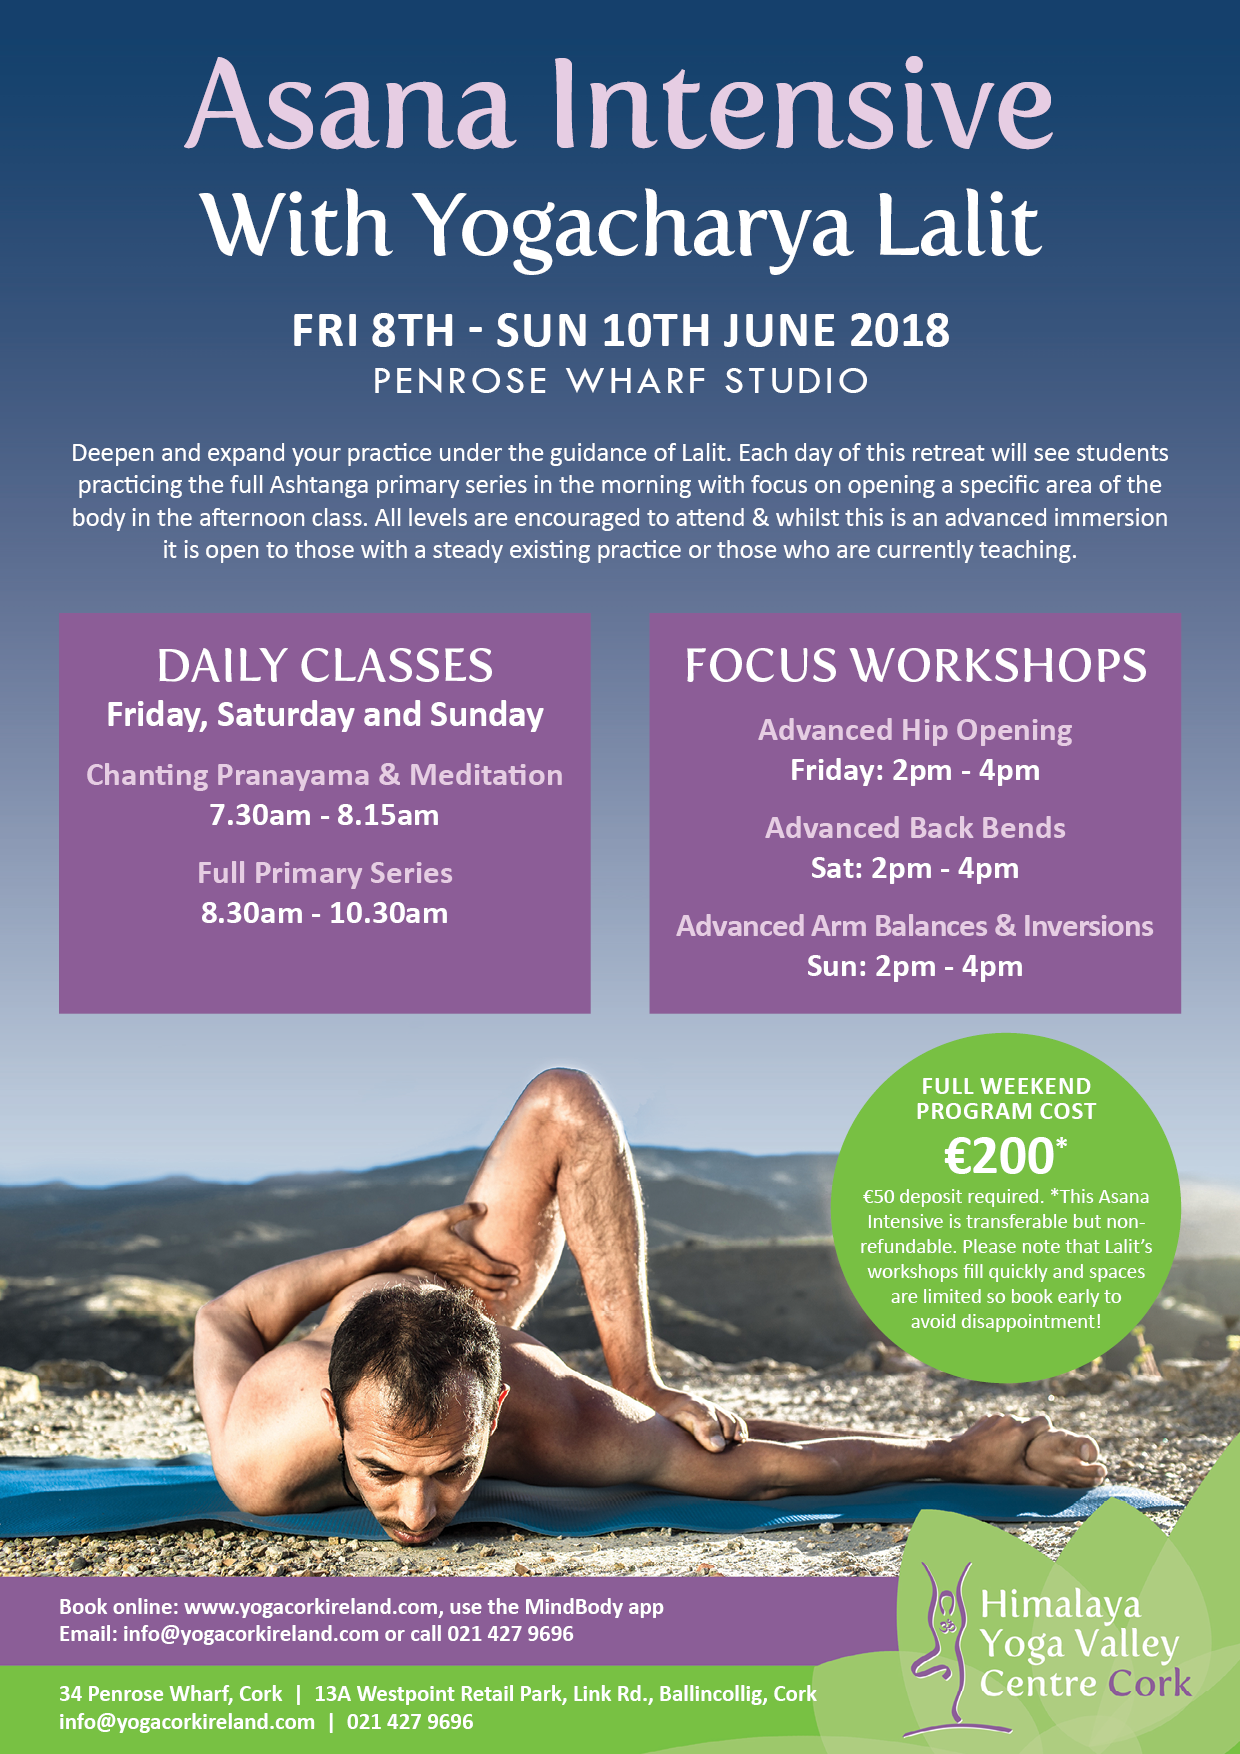 Sign up for Lalit's Asana Intensive Weekend - Himalaya Yoga Valley